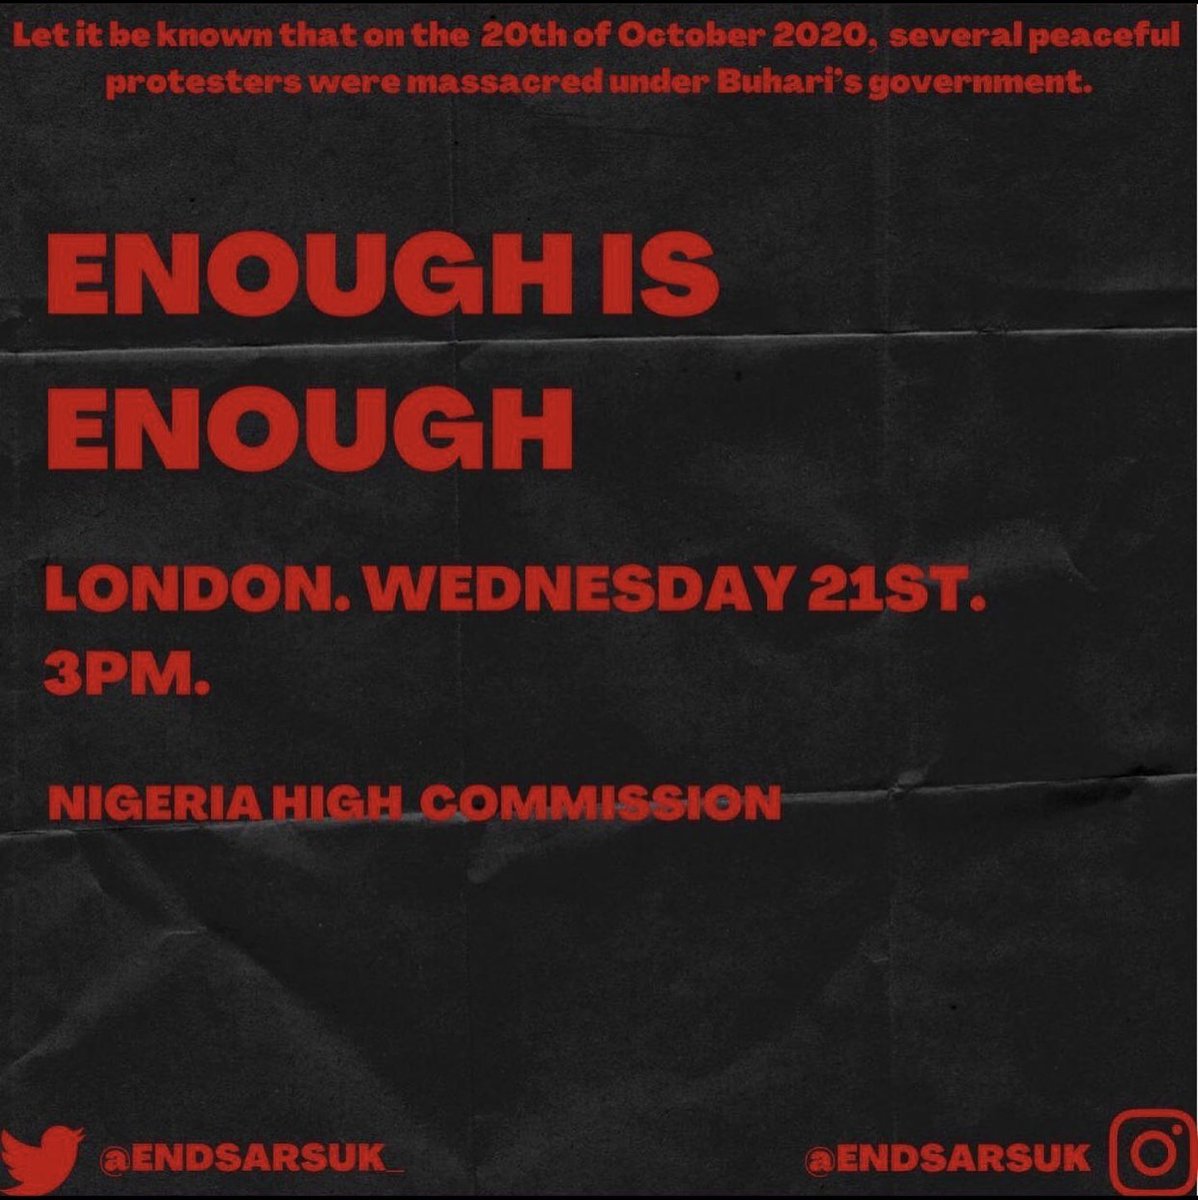 Protest today in London at 3pm outside the Nigeria High Commission in support of the protestors  #EndSARSProtest